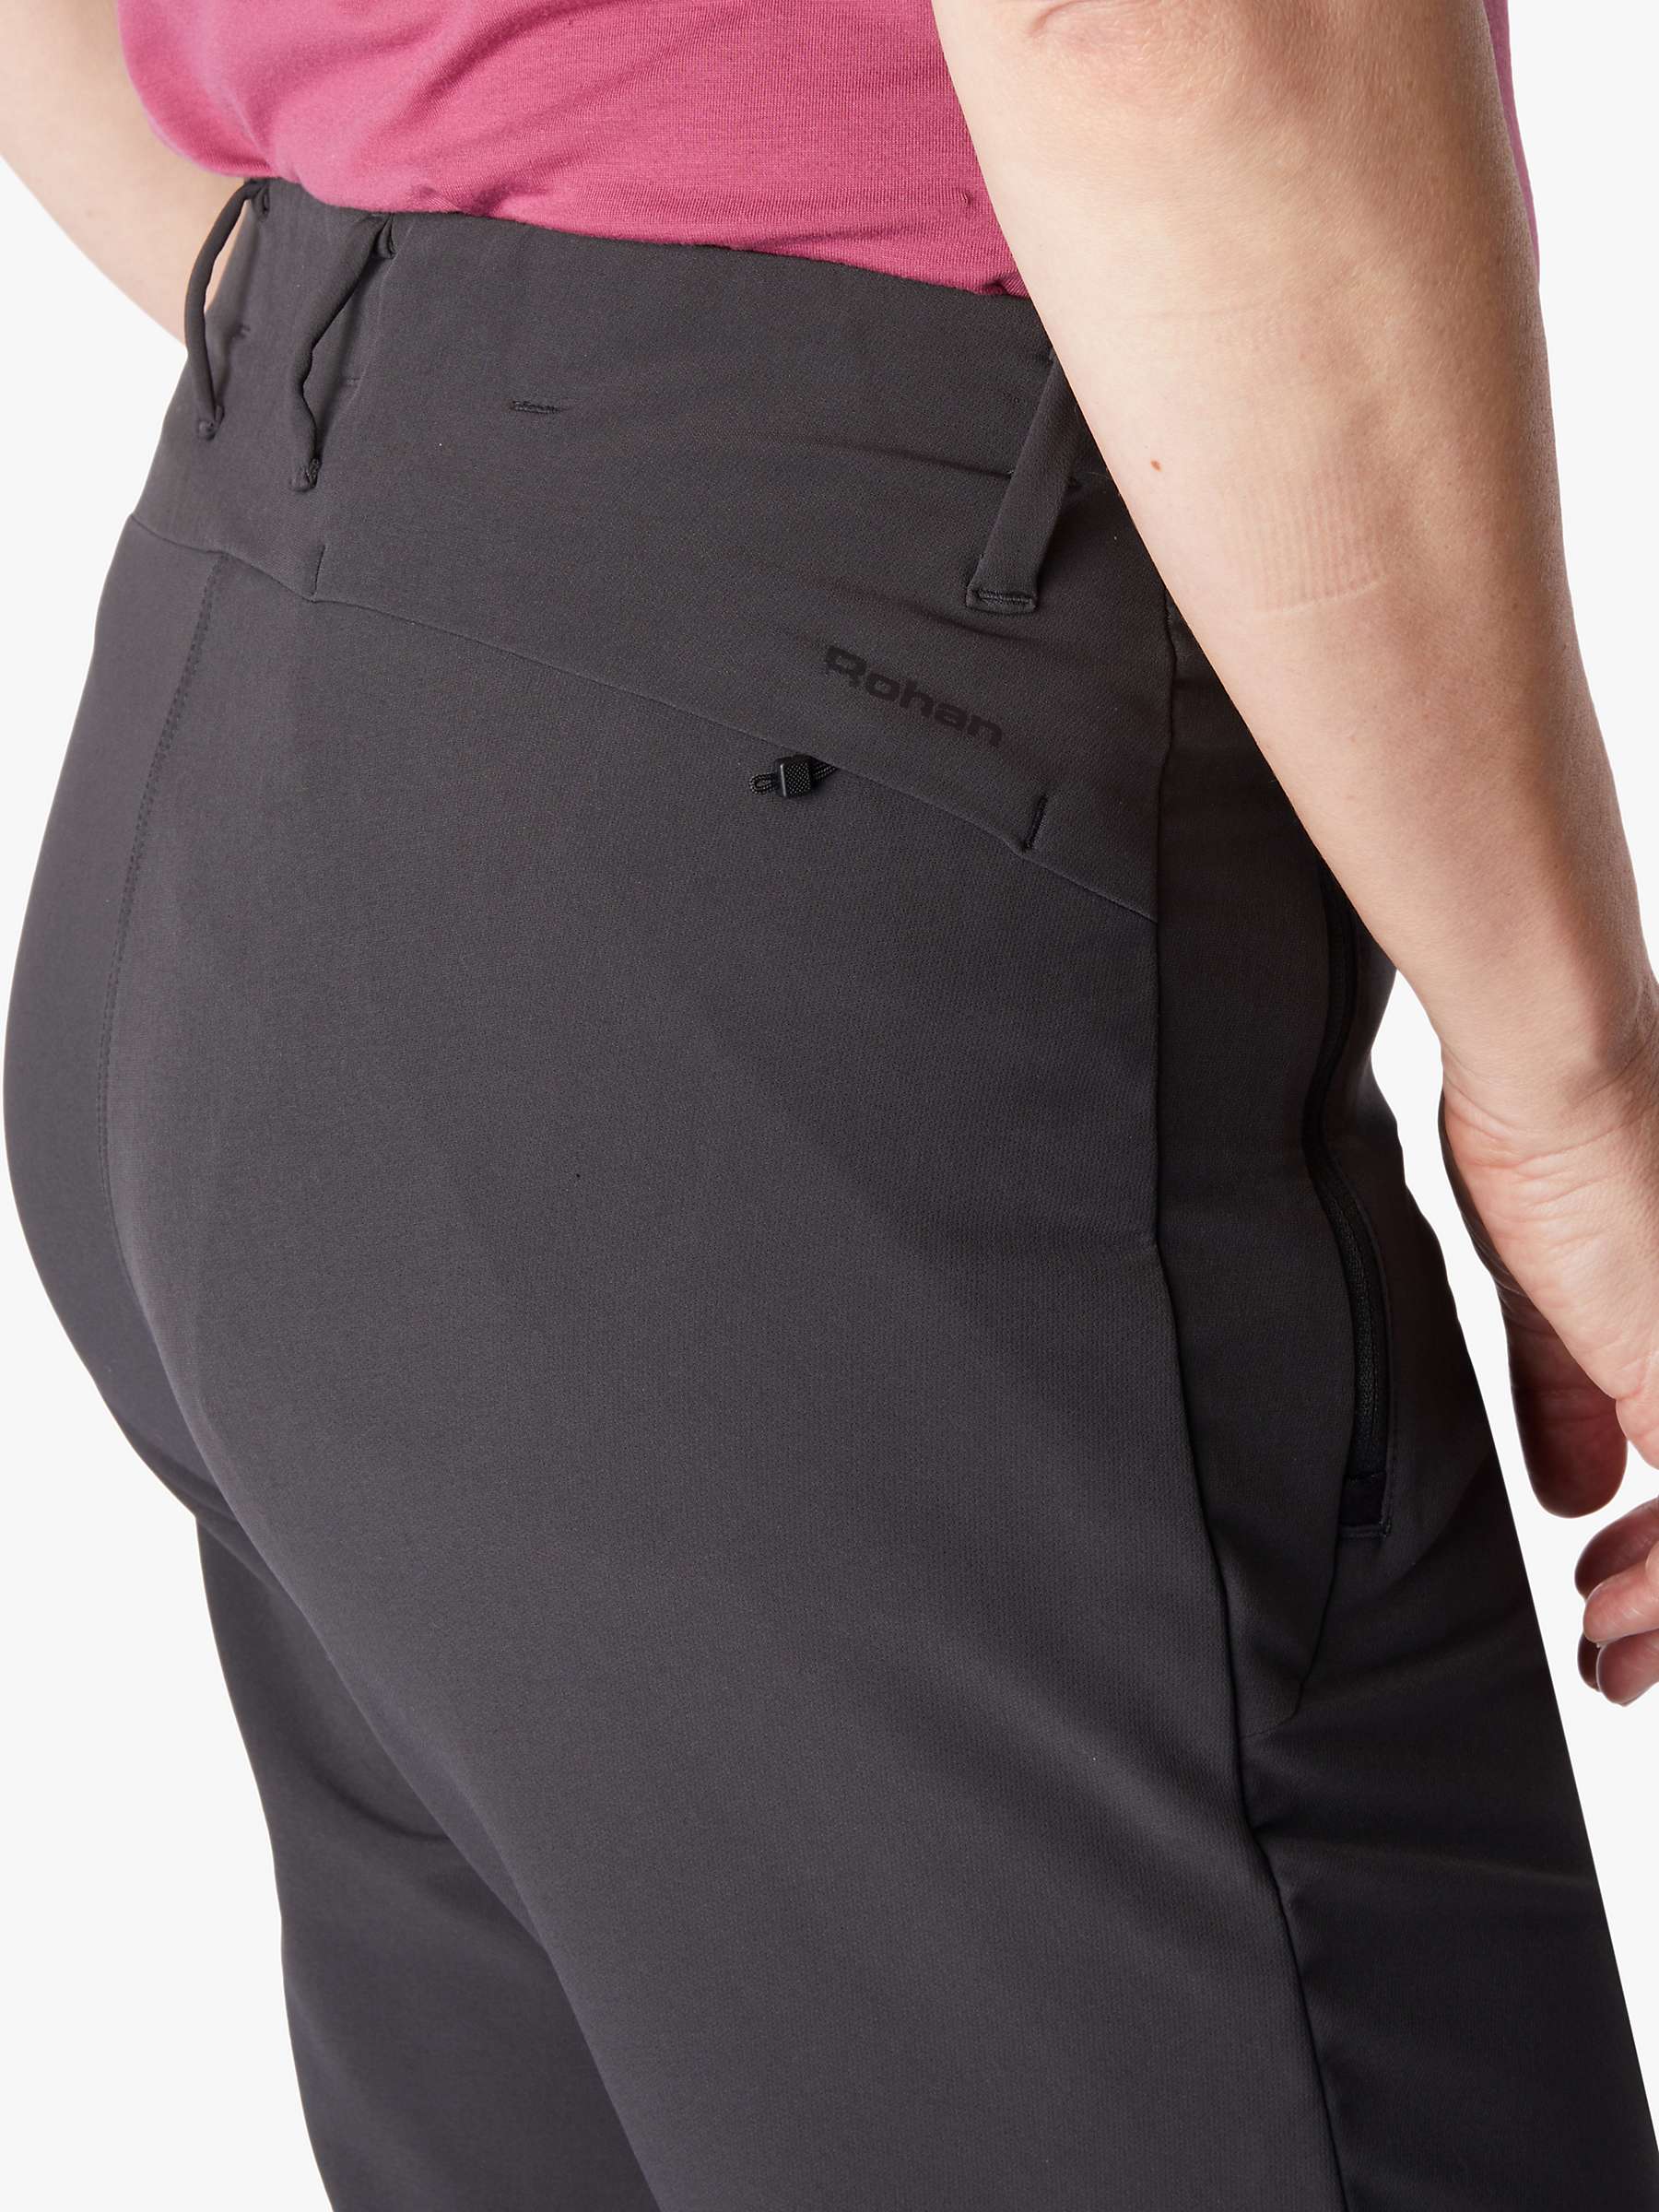 Buy Rohan Striders Women's Hiking Trousers Online at johnlewis.com